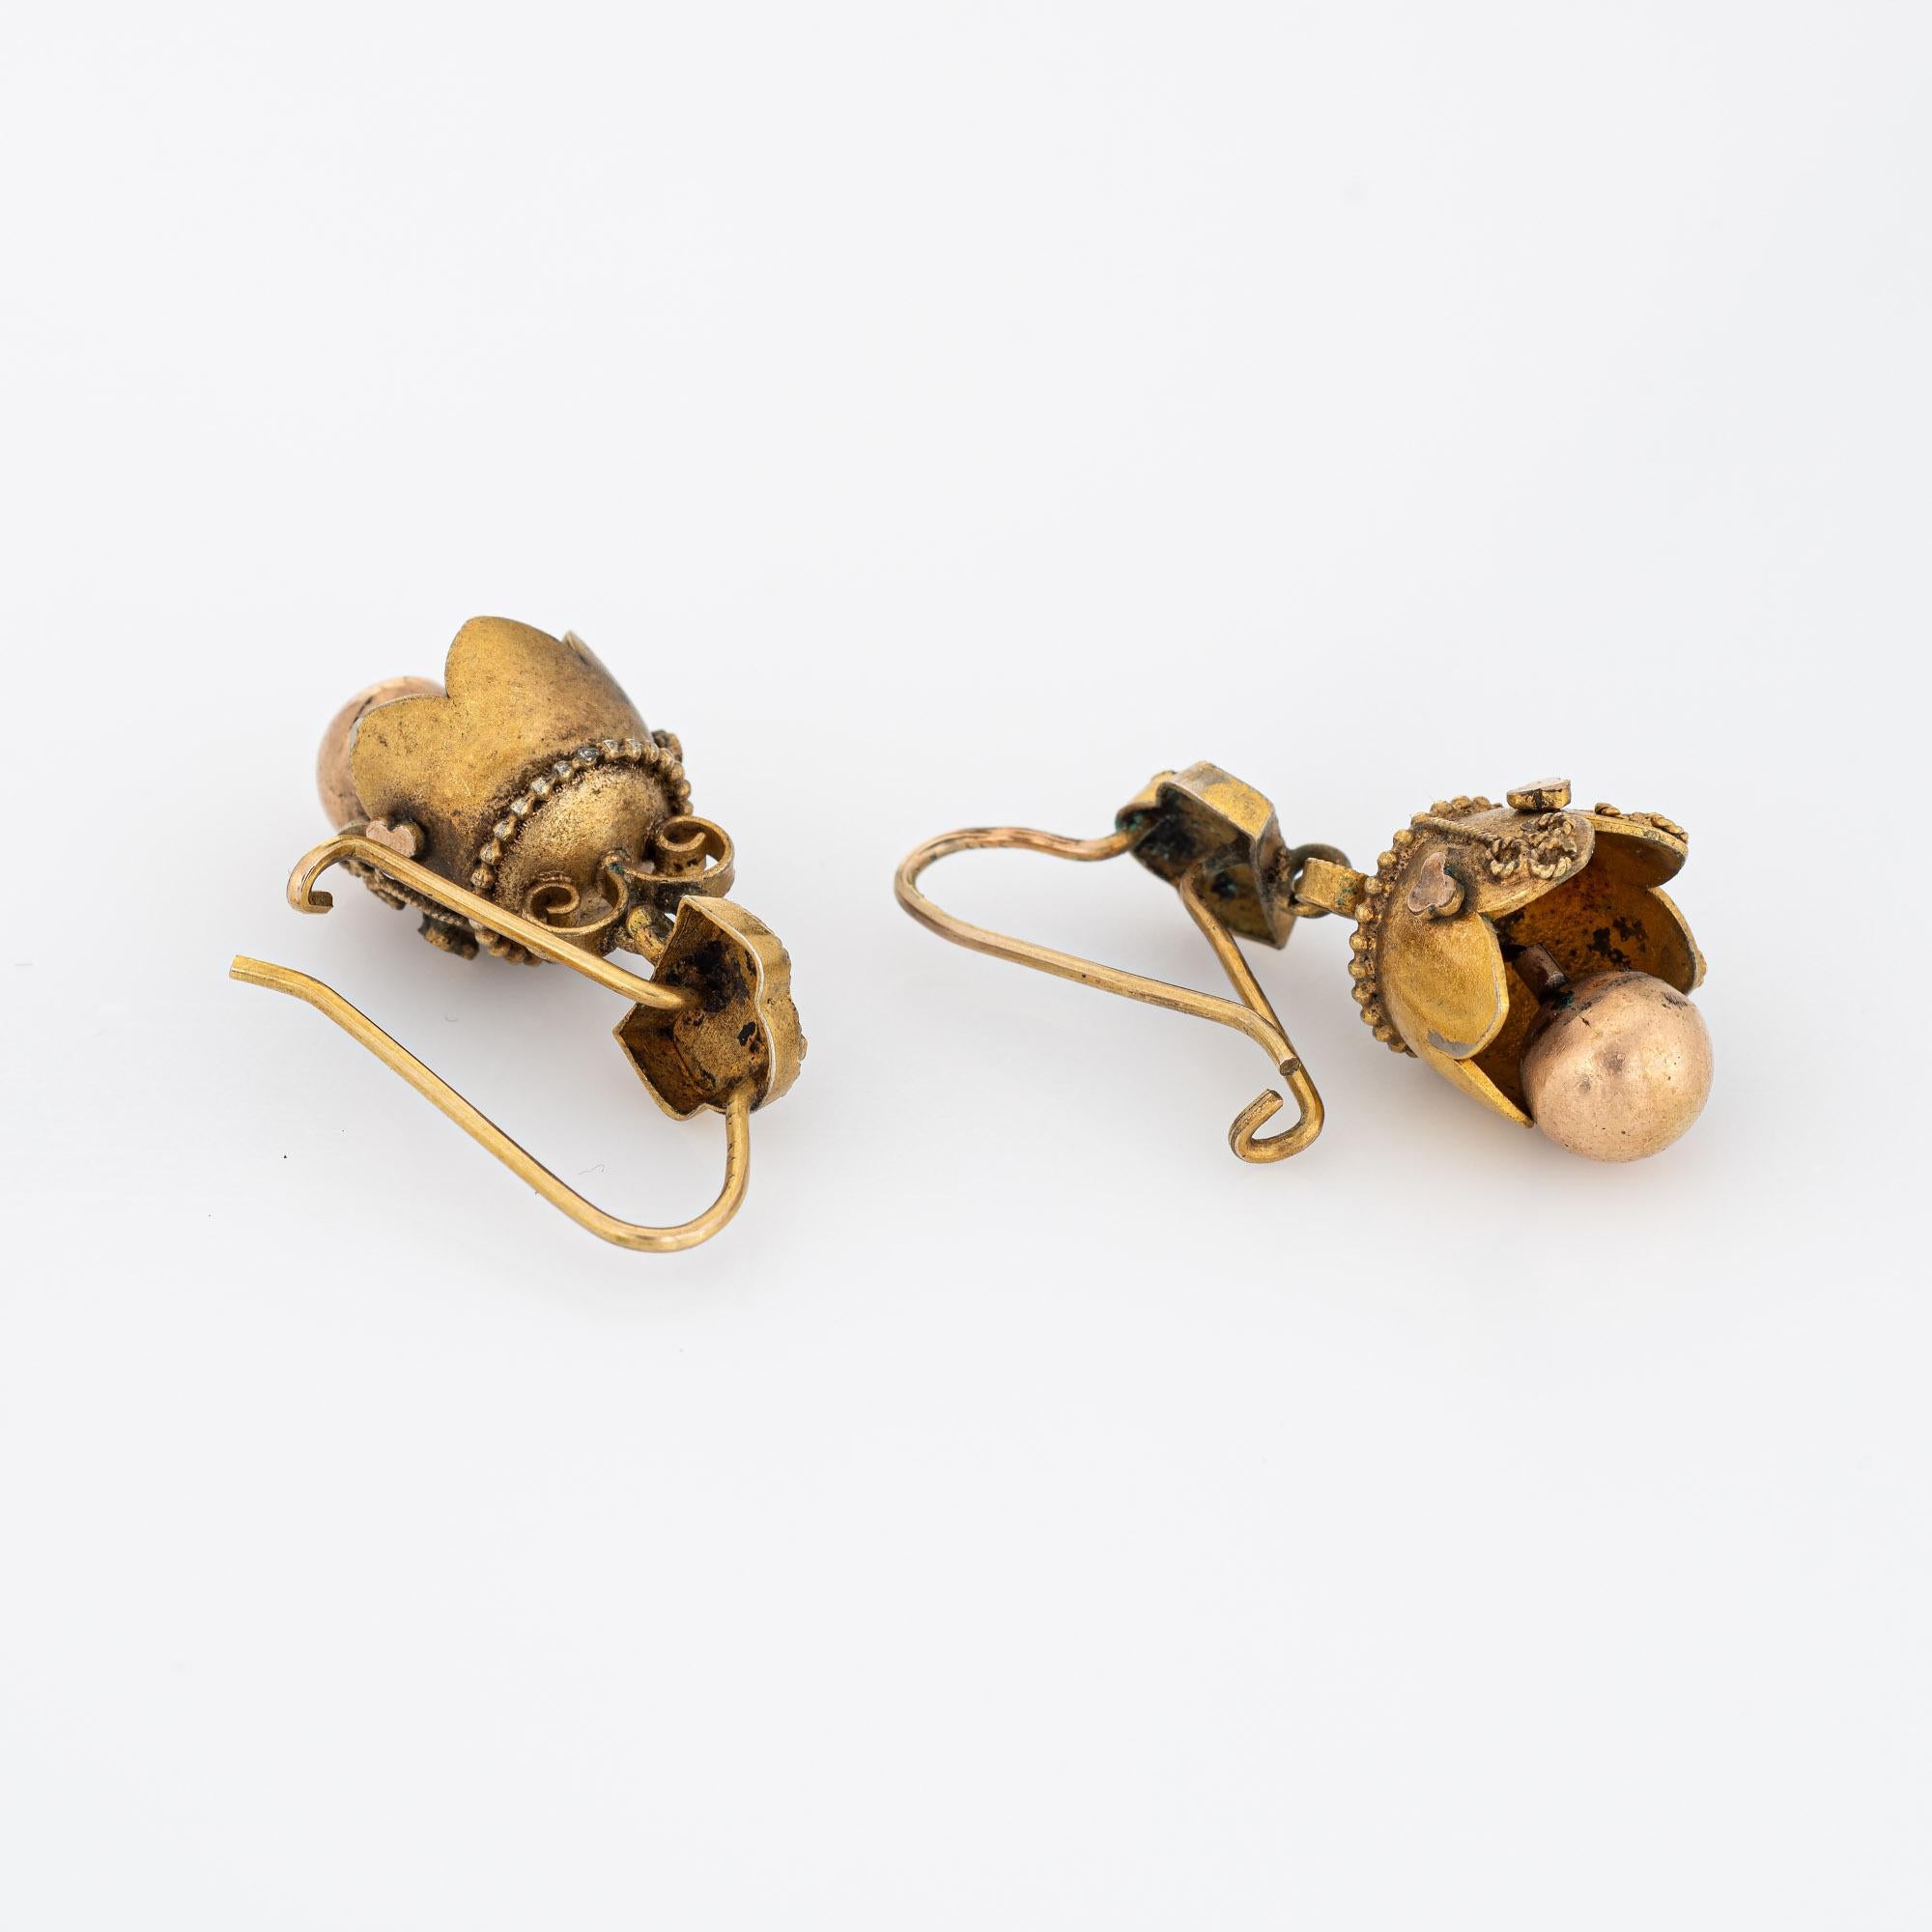 Elegant pair of antique Victorian earrings (circa 1880s to 1900s) crafted in 10k yellow gold. 

The charming Etruscan revival earrings feature scalloped drops with beaded, granulation and rope detailing. The base of the earrings moves with a light